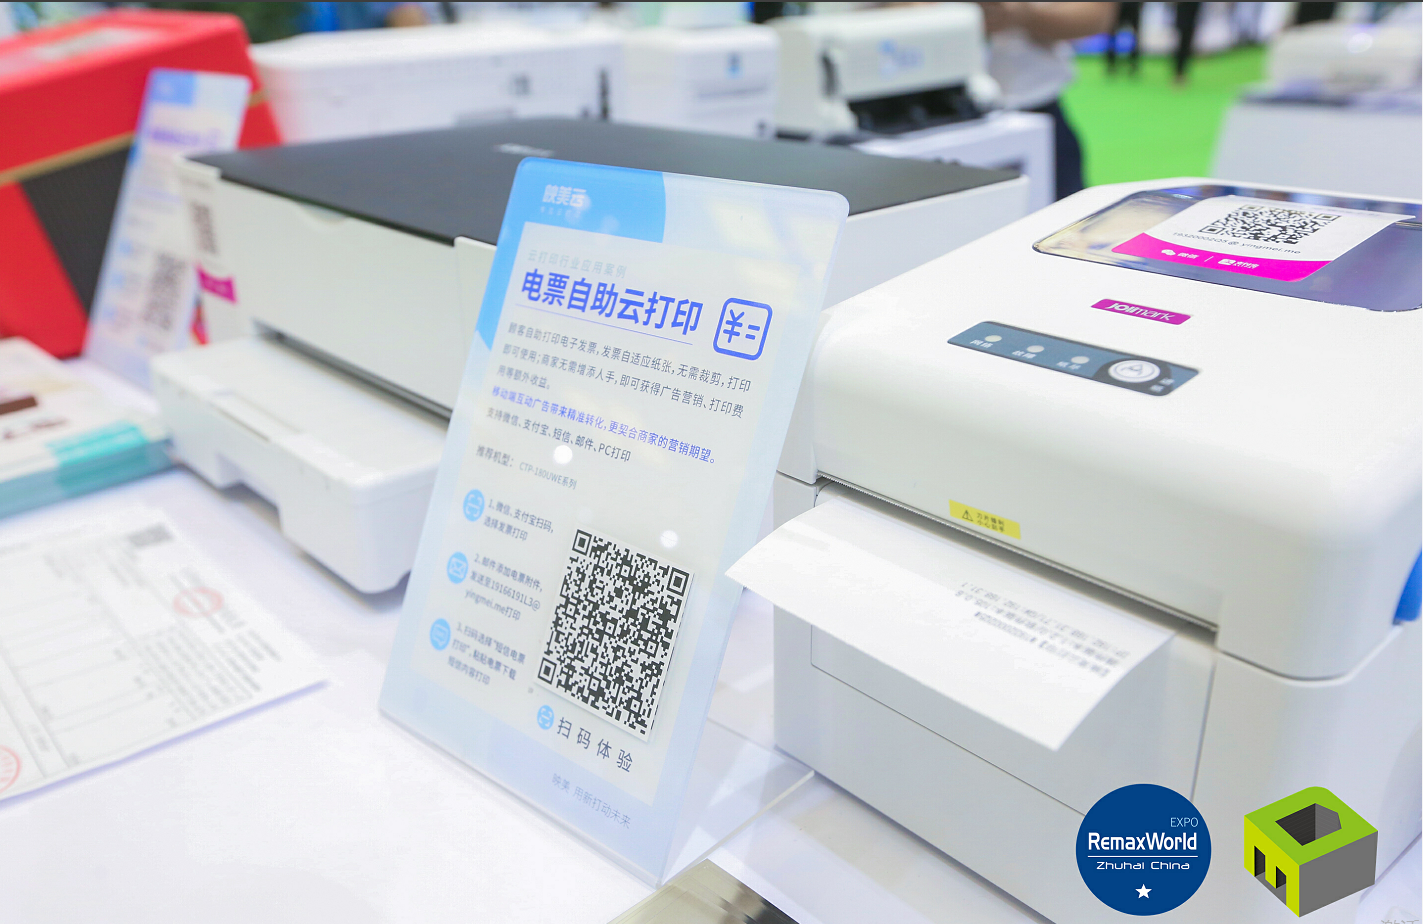 What’s New about Chinese Printers at RemaxWorld rtmworld